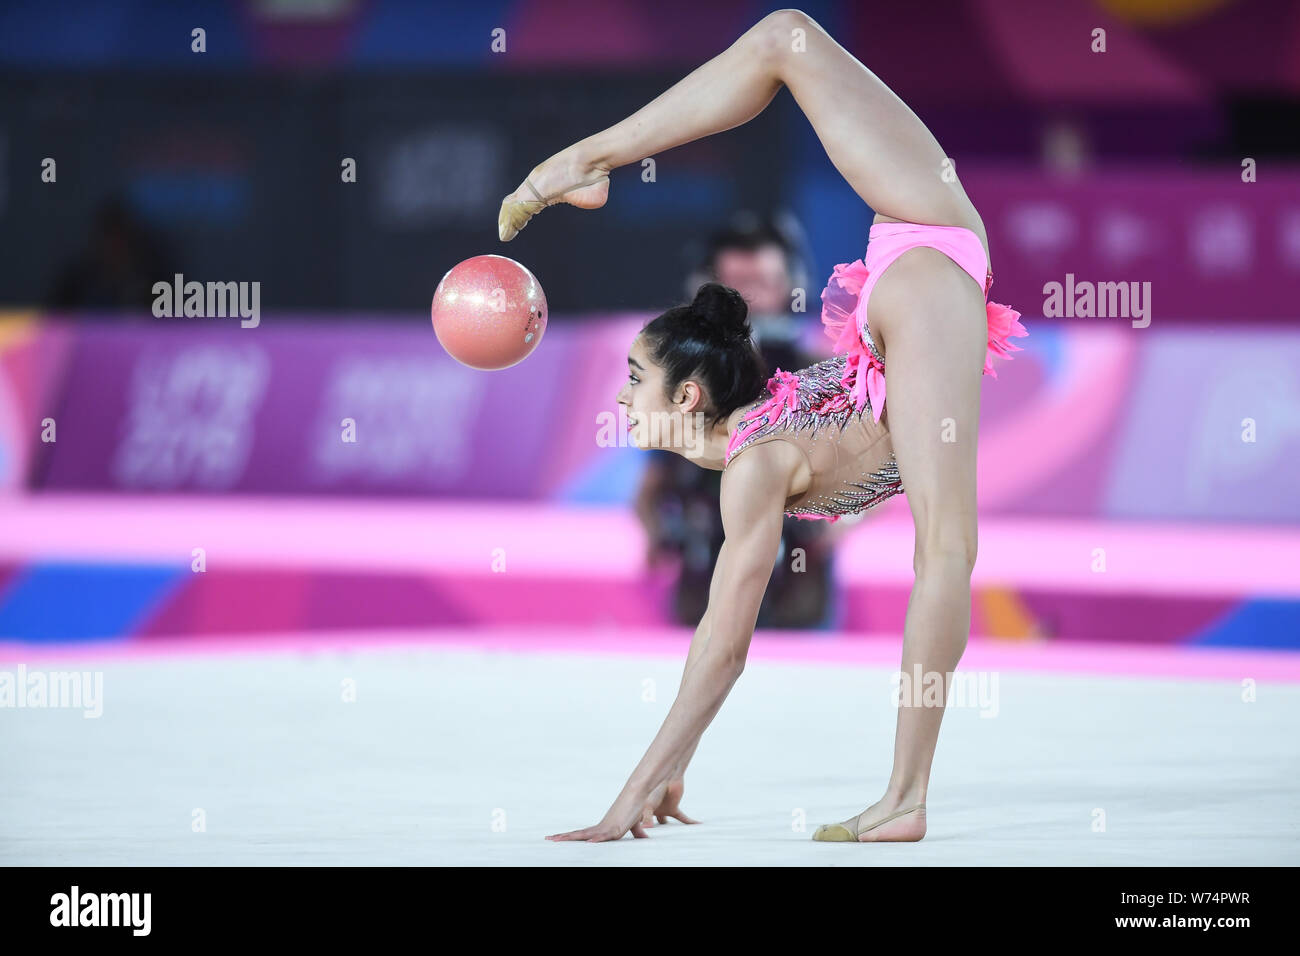 Lima, Peru. 4th Aug, 2019. NATALIE GARCIA from Canada bounces the ball with her foot over her head during the competition held in the Polideportivo Villa El Salvador in Lima, Peru. Credit: Amy Sanderson/ZUMA Wire/Alamy Live News Stock Photo